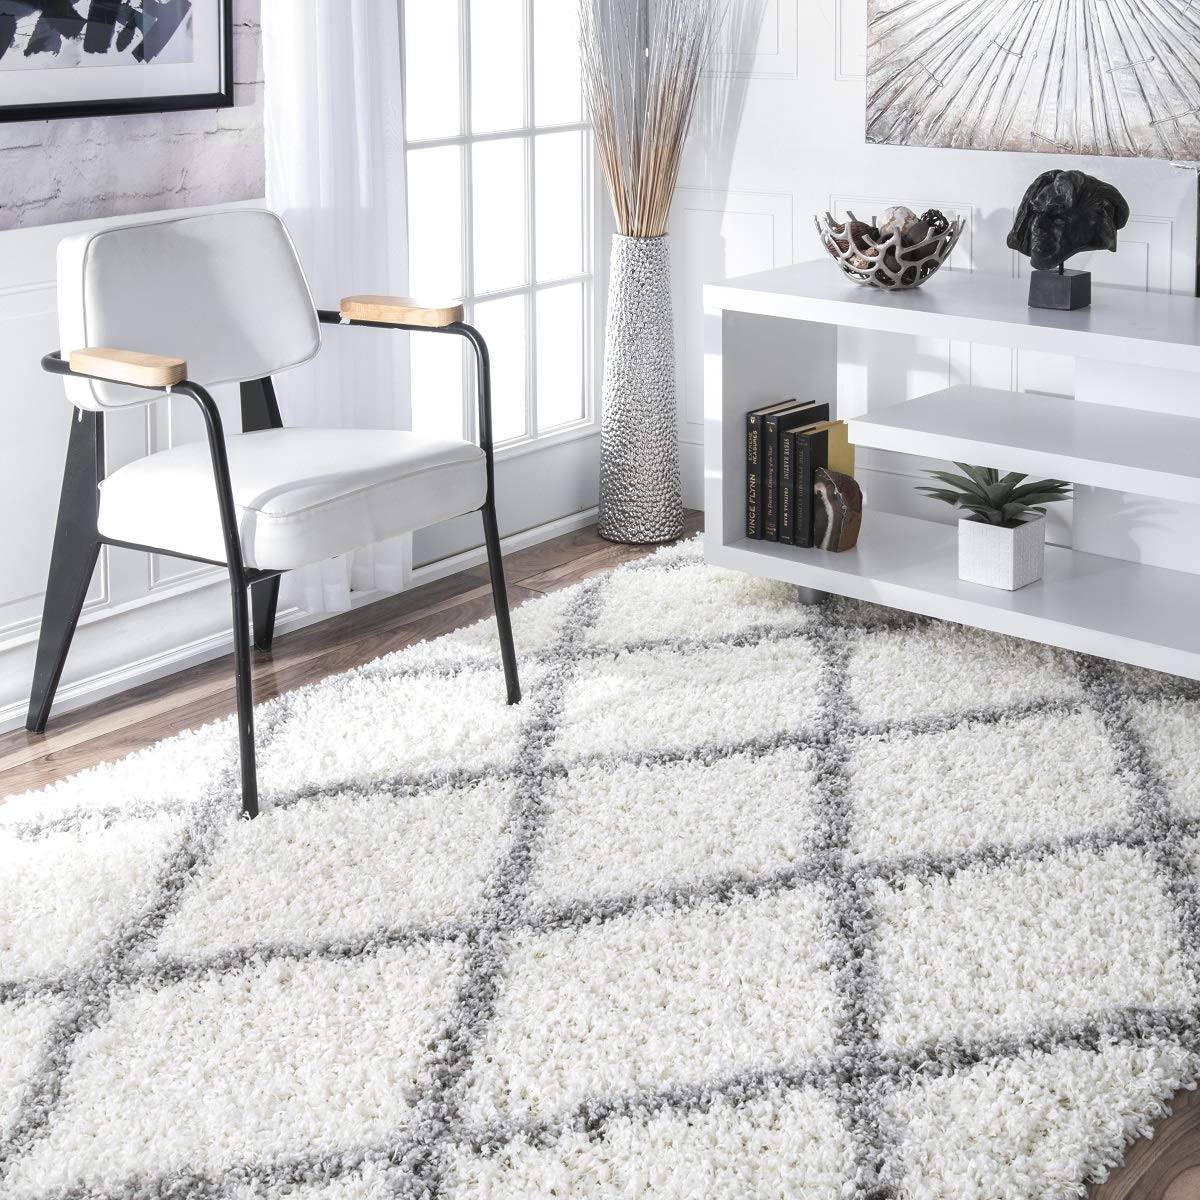 Kashyapa Rugs Collection - Handmade tufted Microfiber Living Room Soft Carpet. Color- Ivory With Grey Line